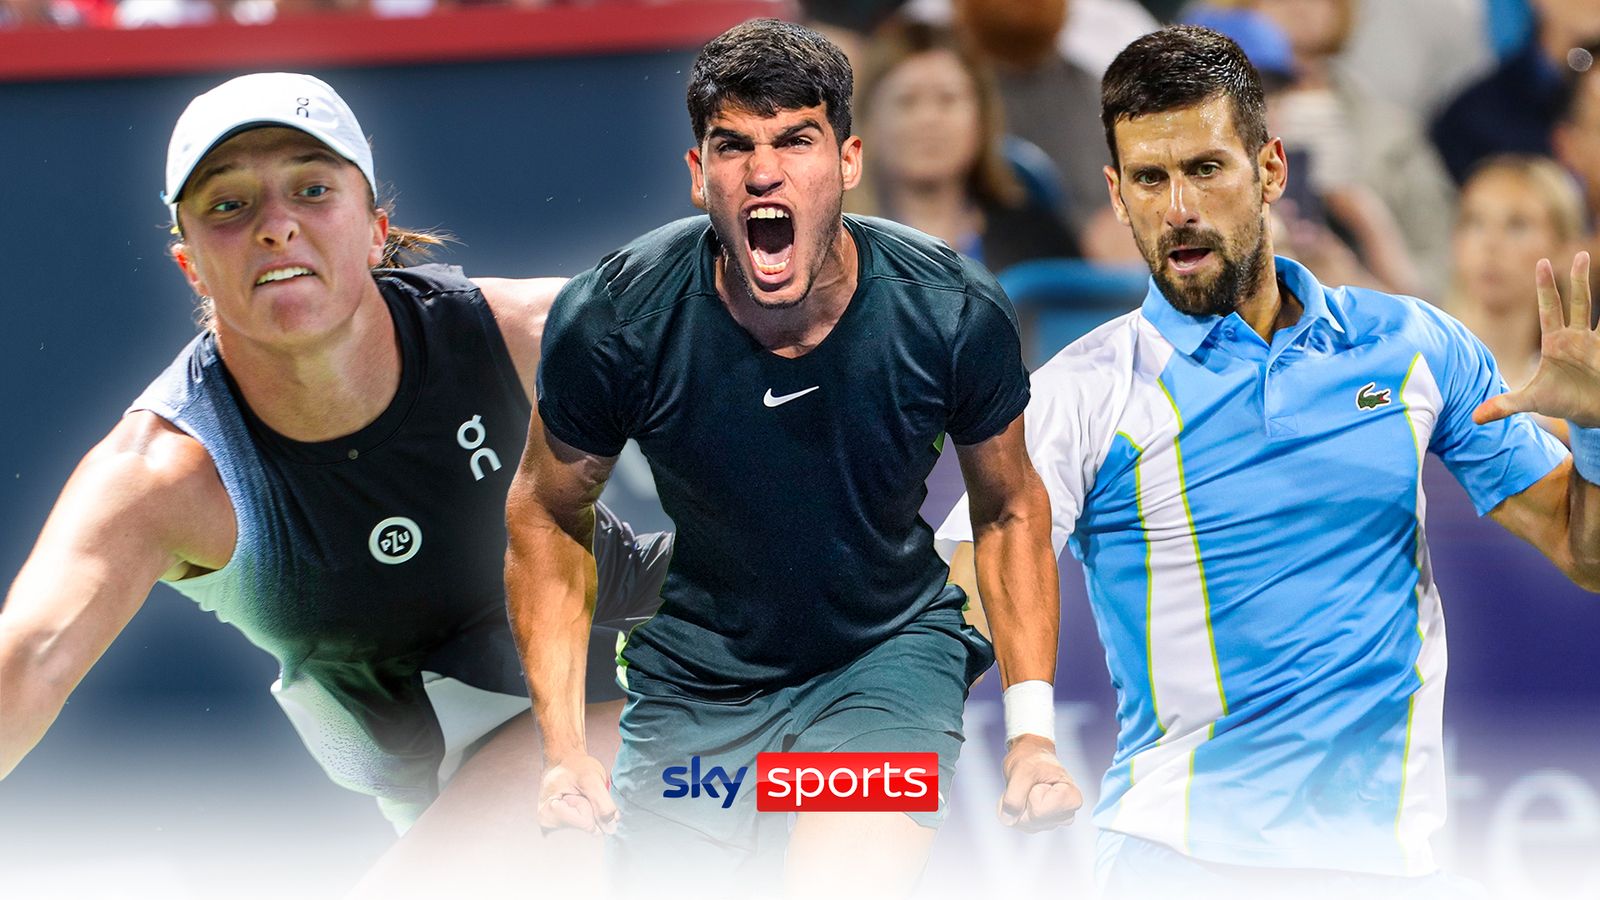 US Open tennis on Sky Sports How to watch all courts streamed live and